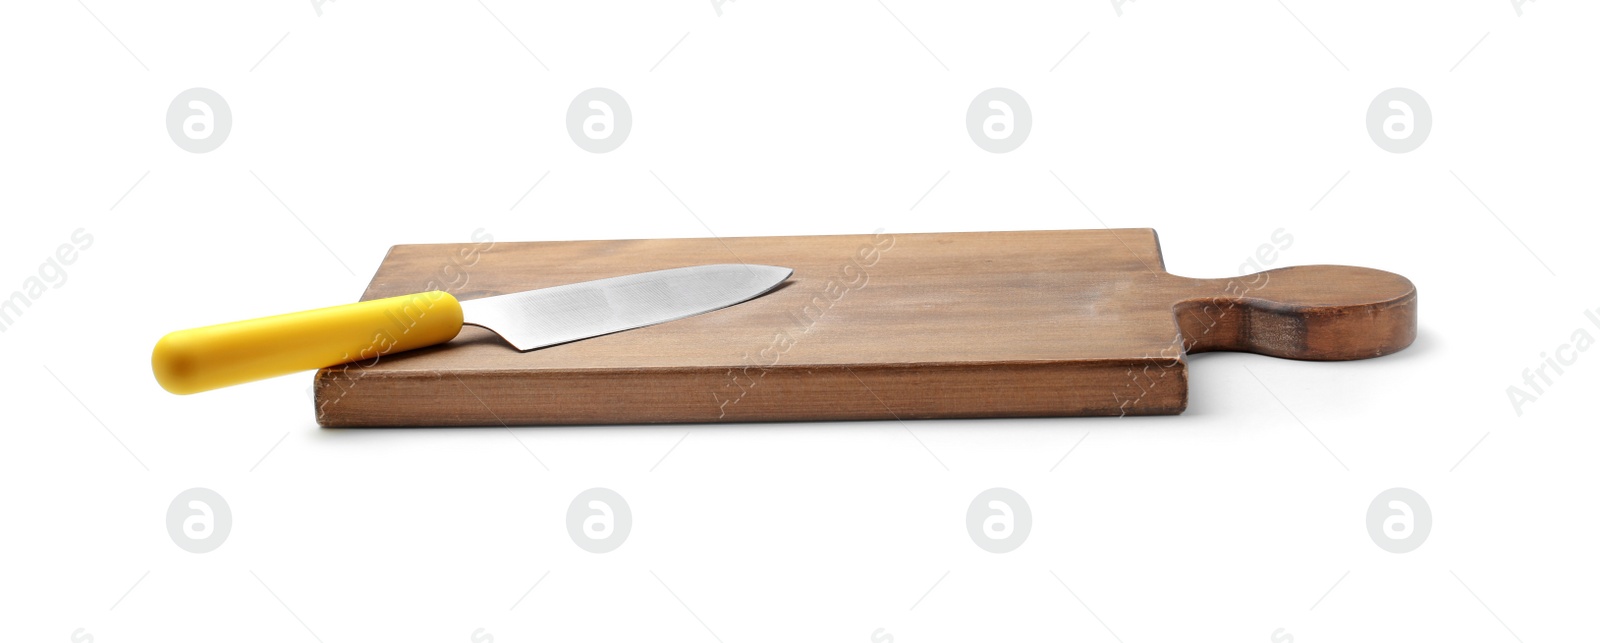 Photo of Stainless steel chef's knife with plastic handle on board against white background